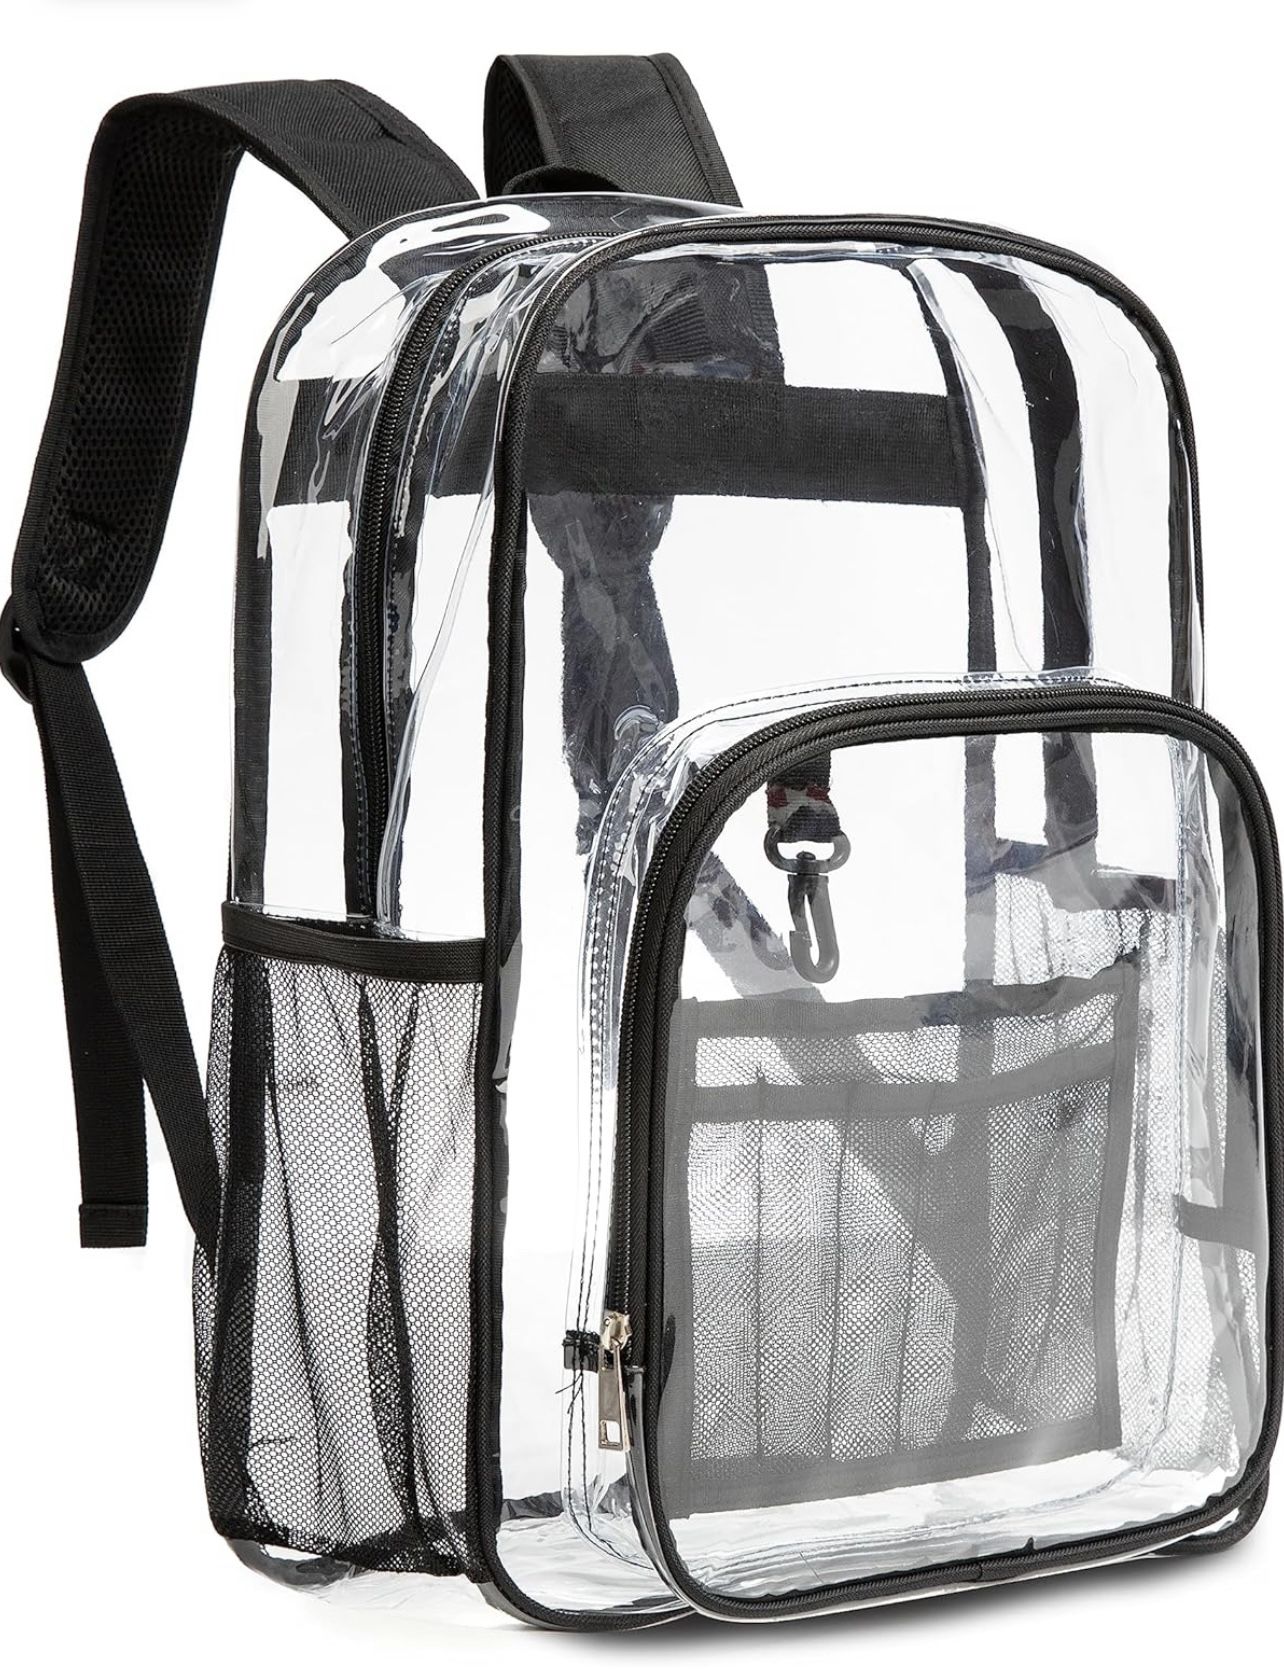 Clear Backpack Heavy Duty PVC Transparent Backpack See Through Backpacks for School,Work,Sports,Stadium,Security Travel